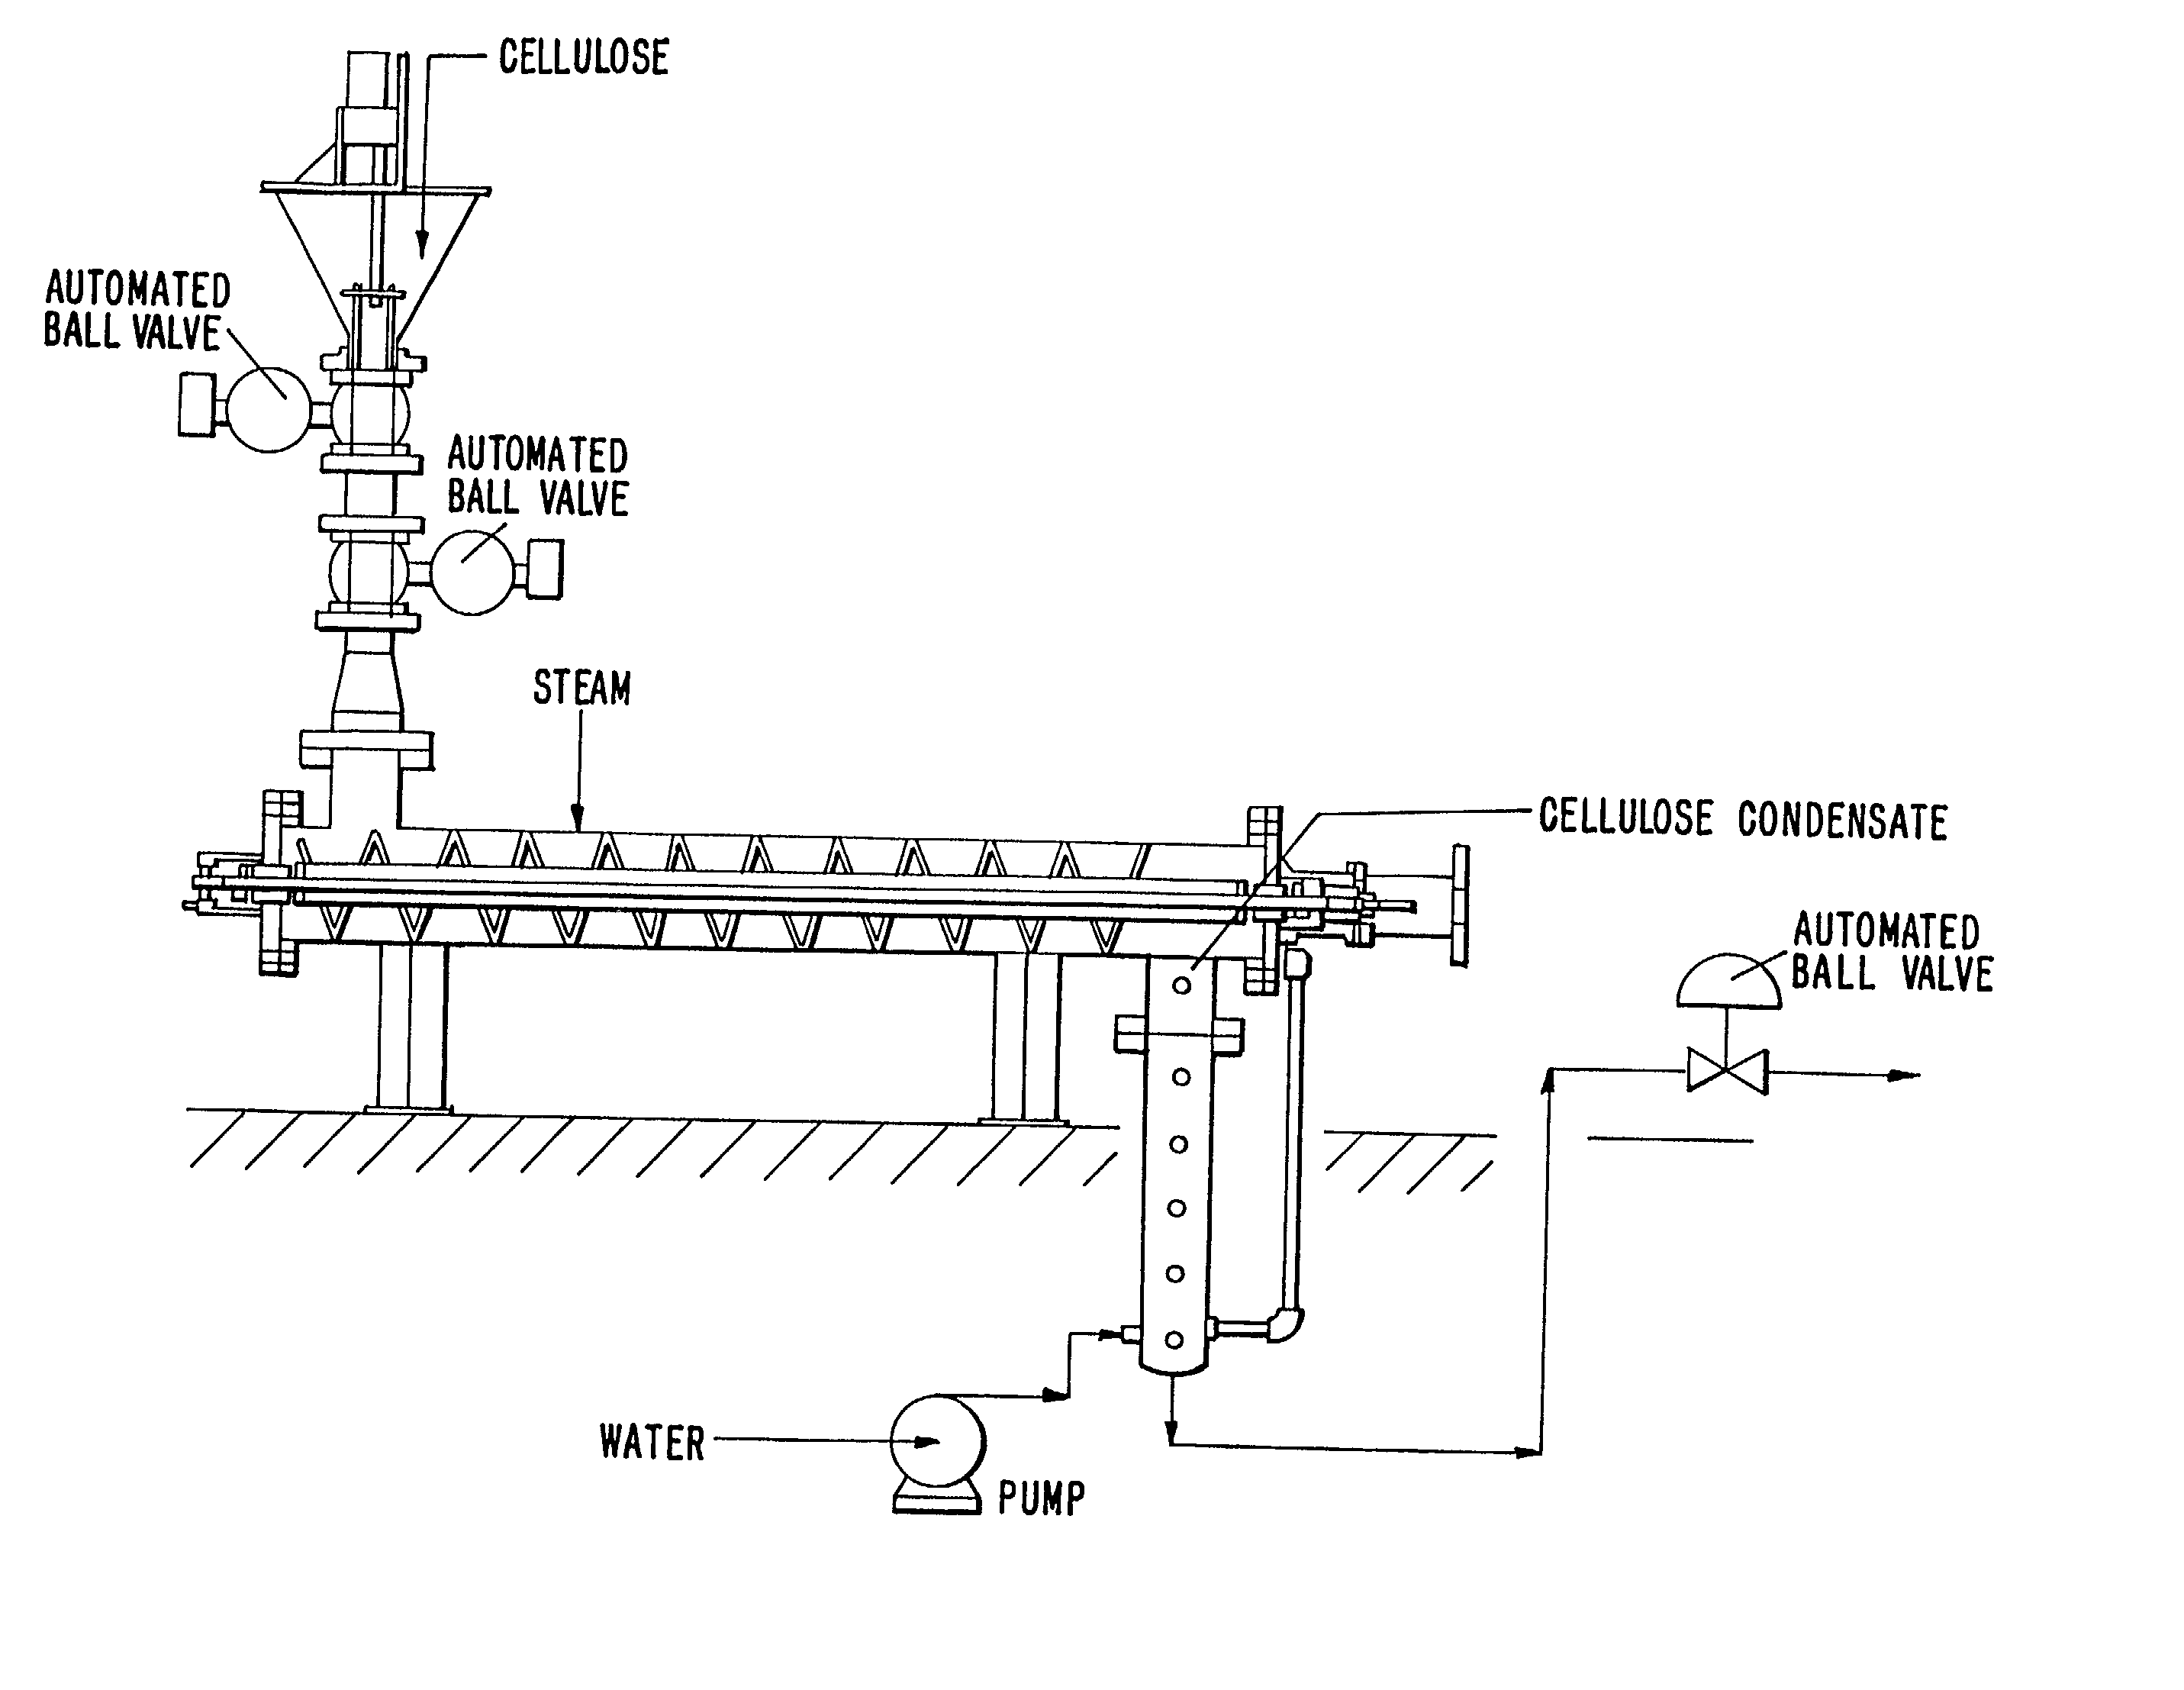 Process for producing microcrystalline cellulose